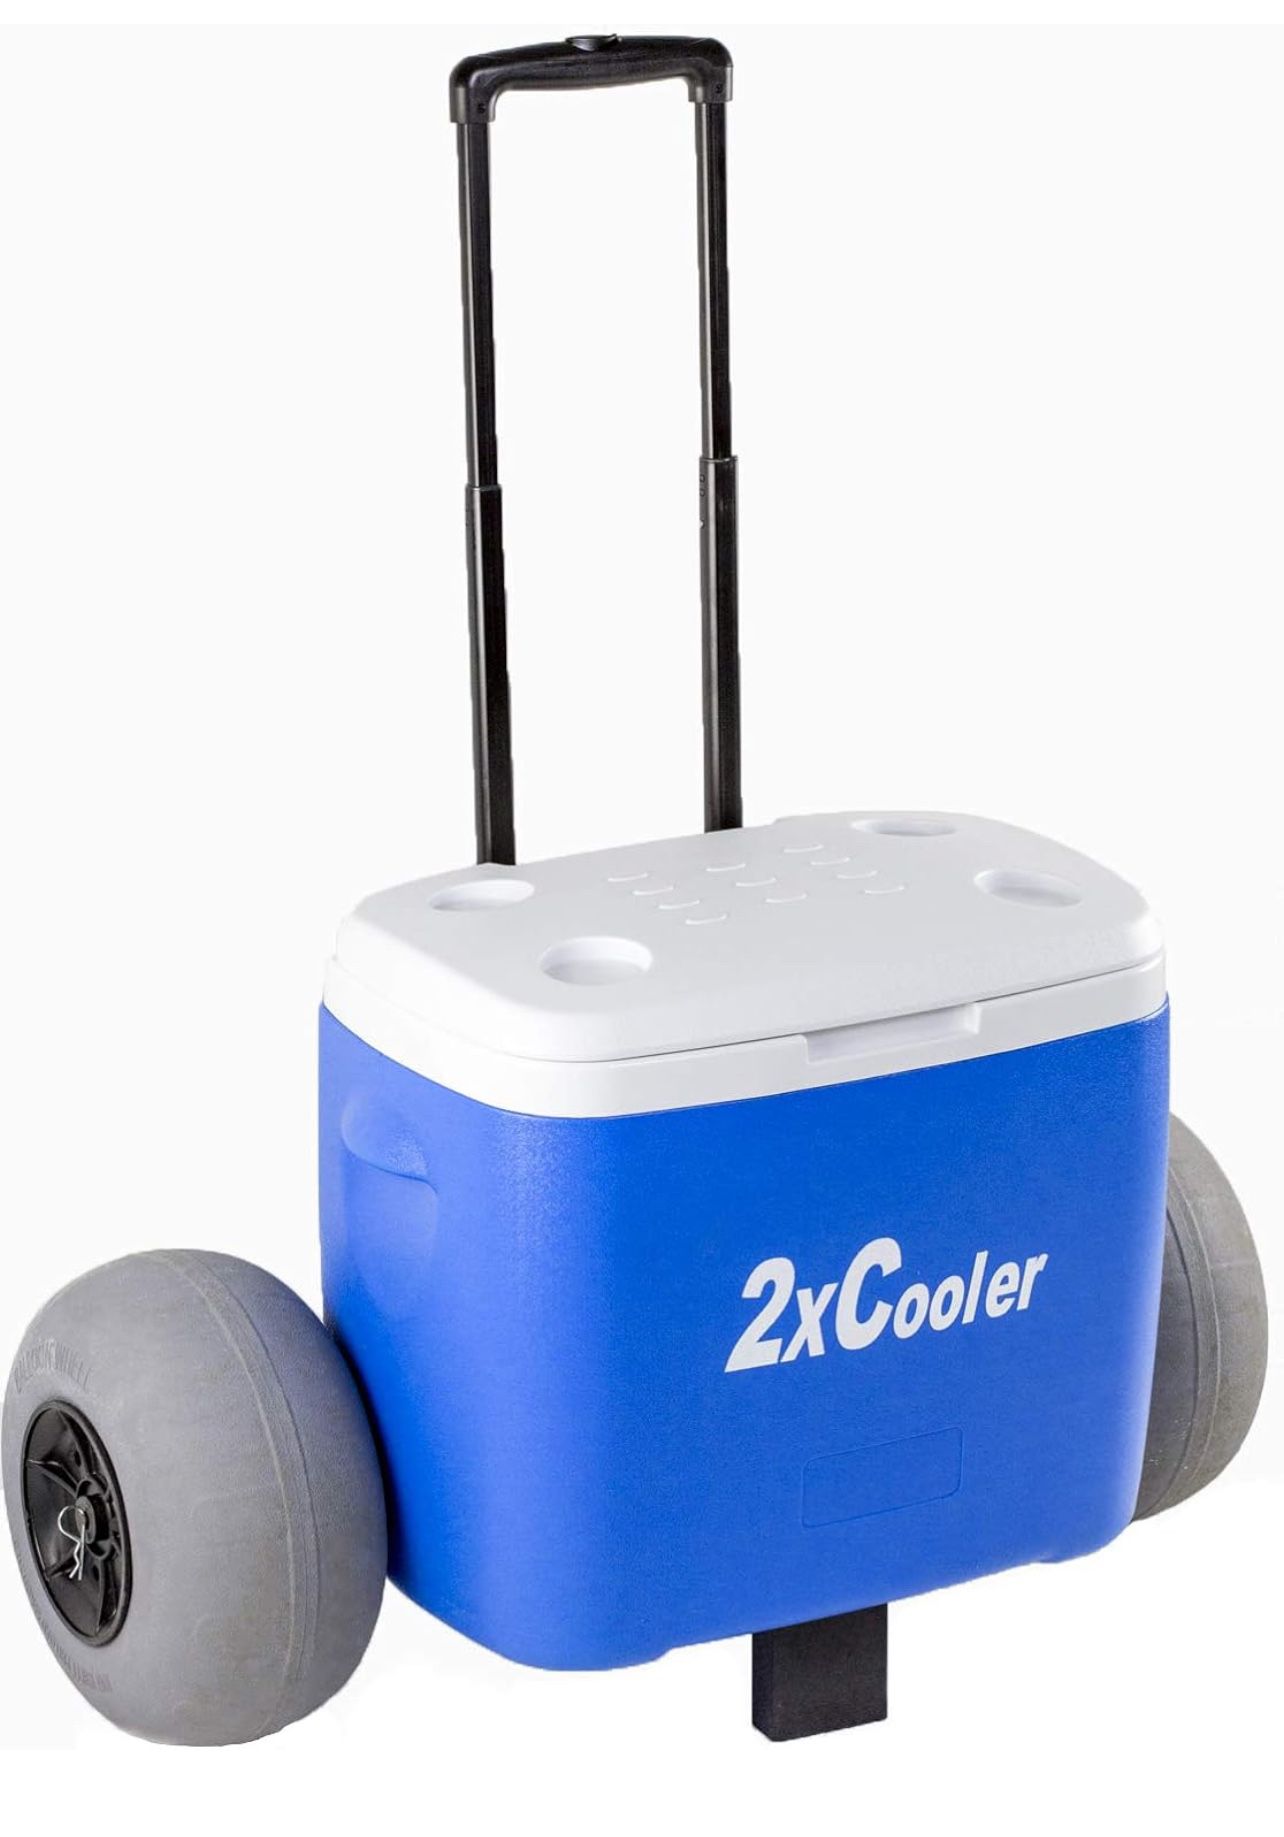 All Terrain Coolers Wheeled Cooler with Inflatable Tires